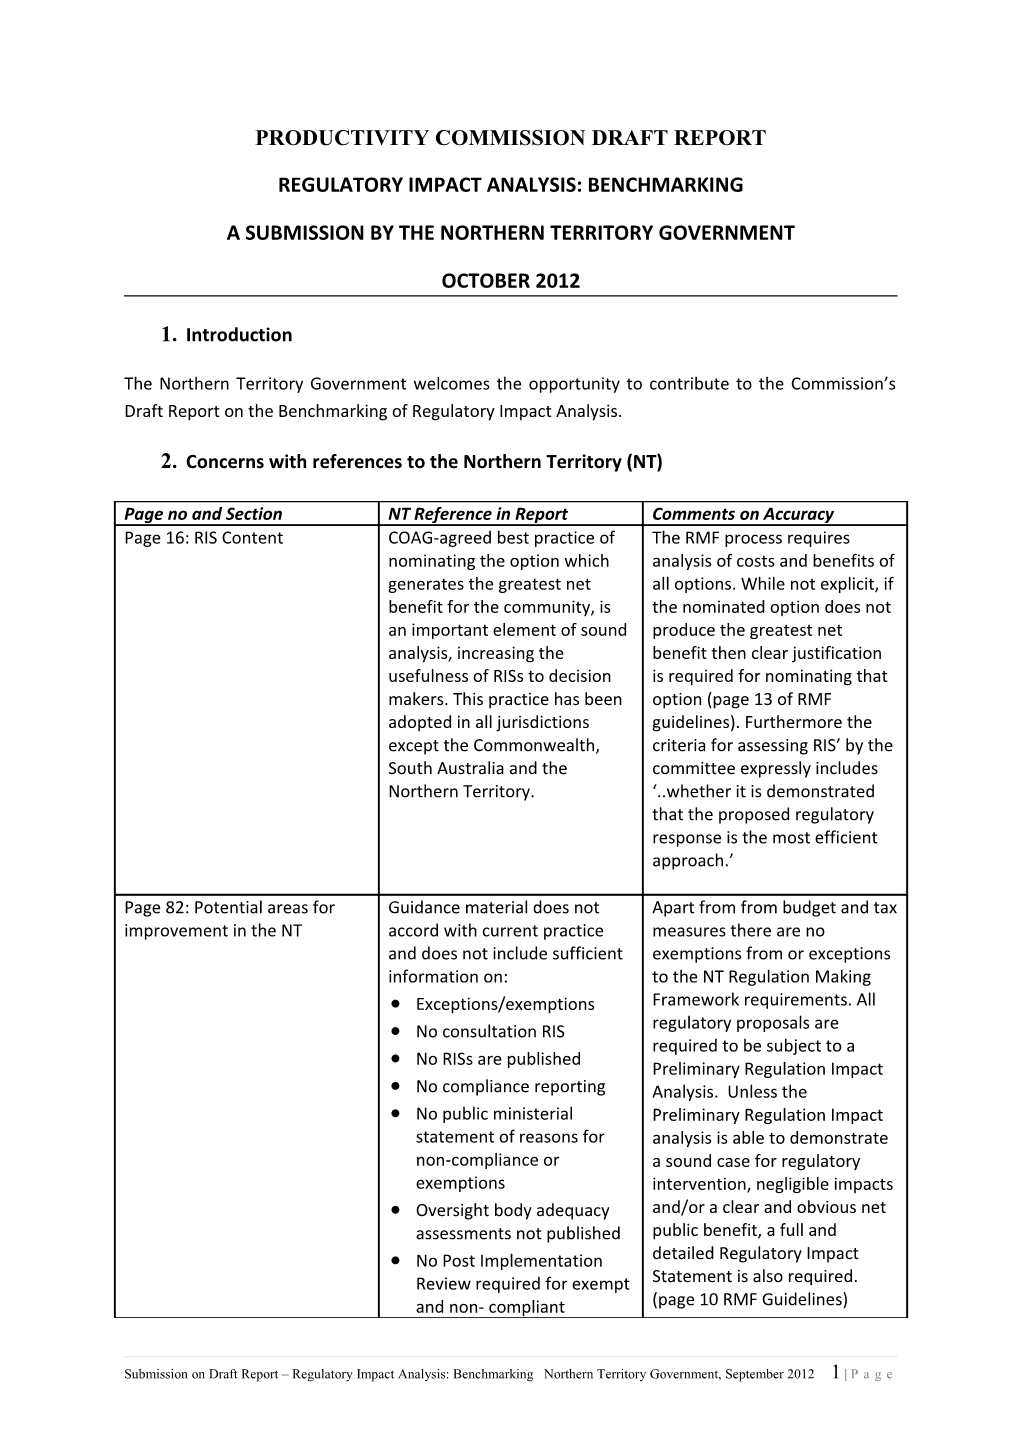 Submission DR30 - Northern Territory Department of Treasury and Finance - Regulatory Impact